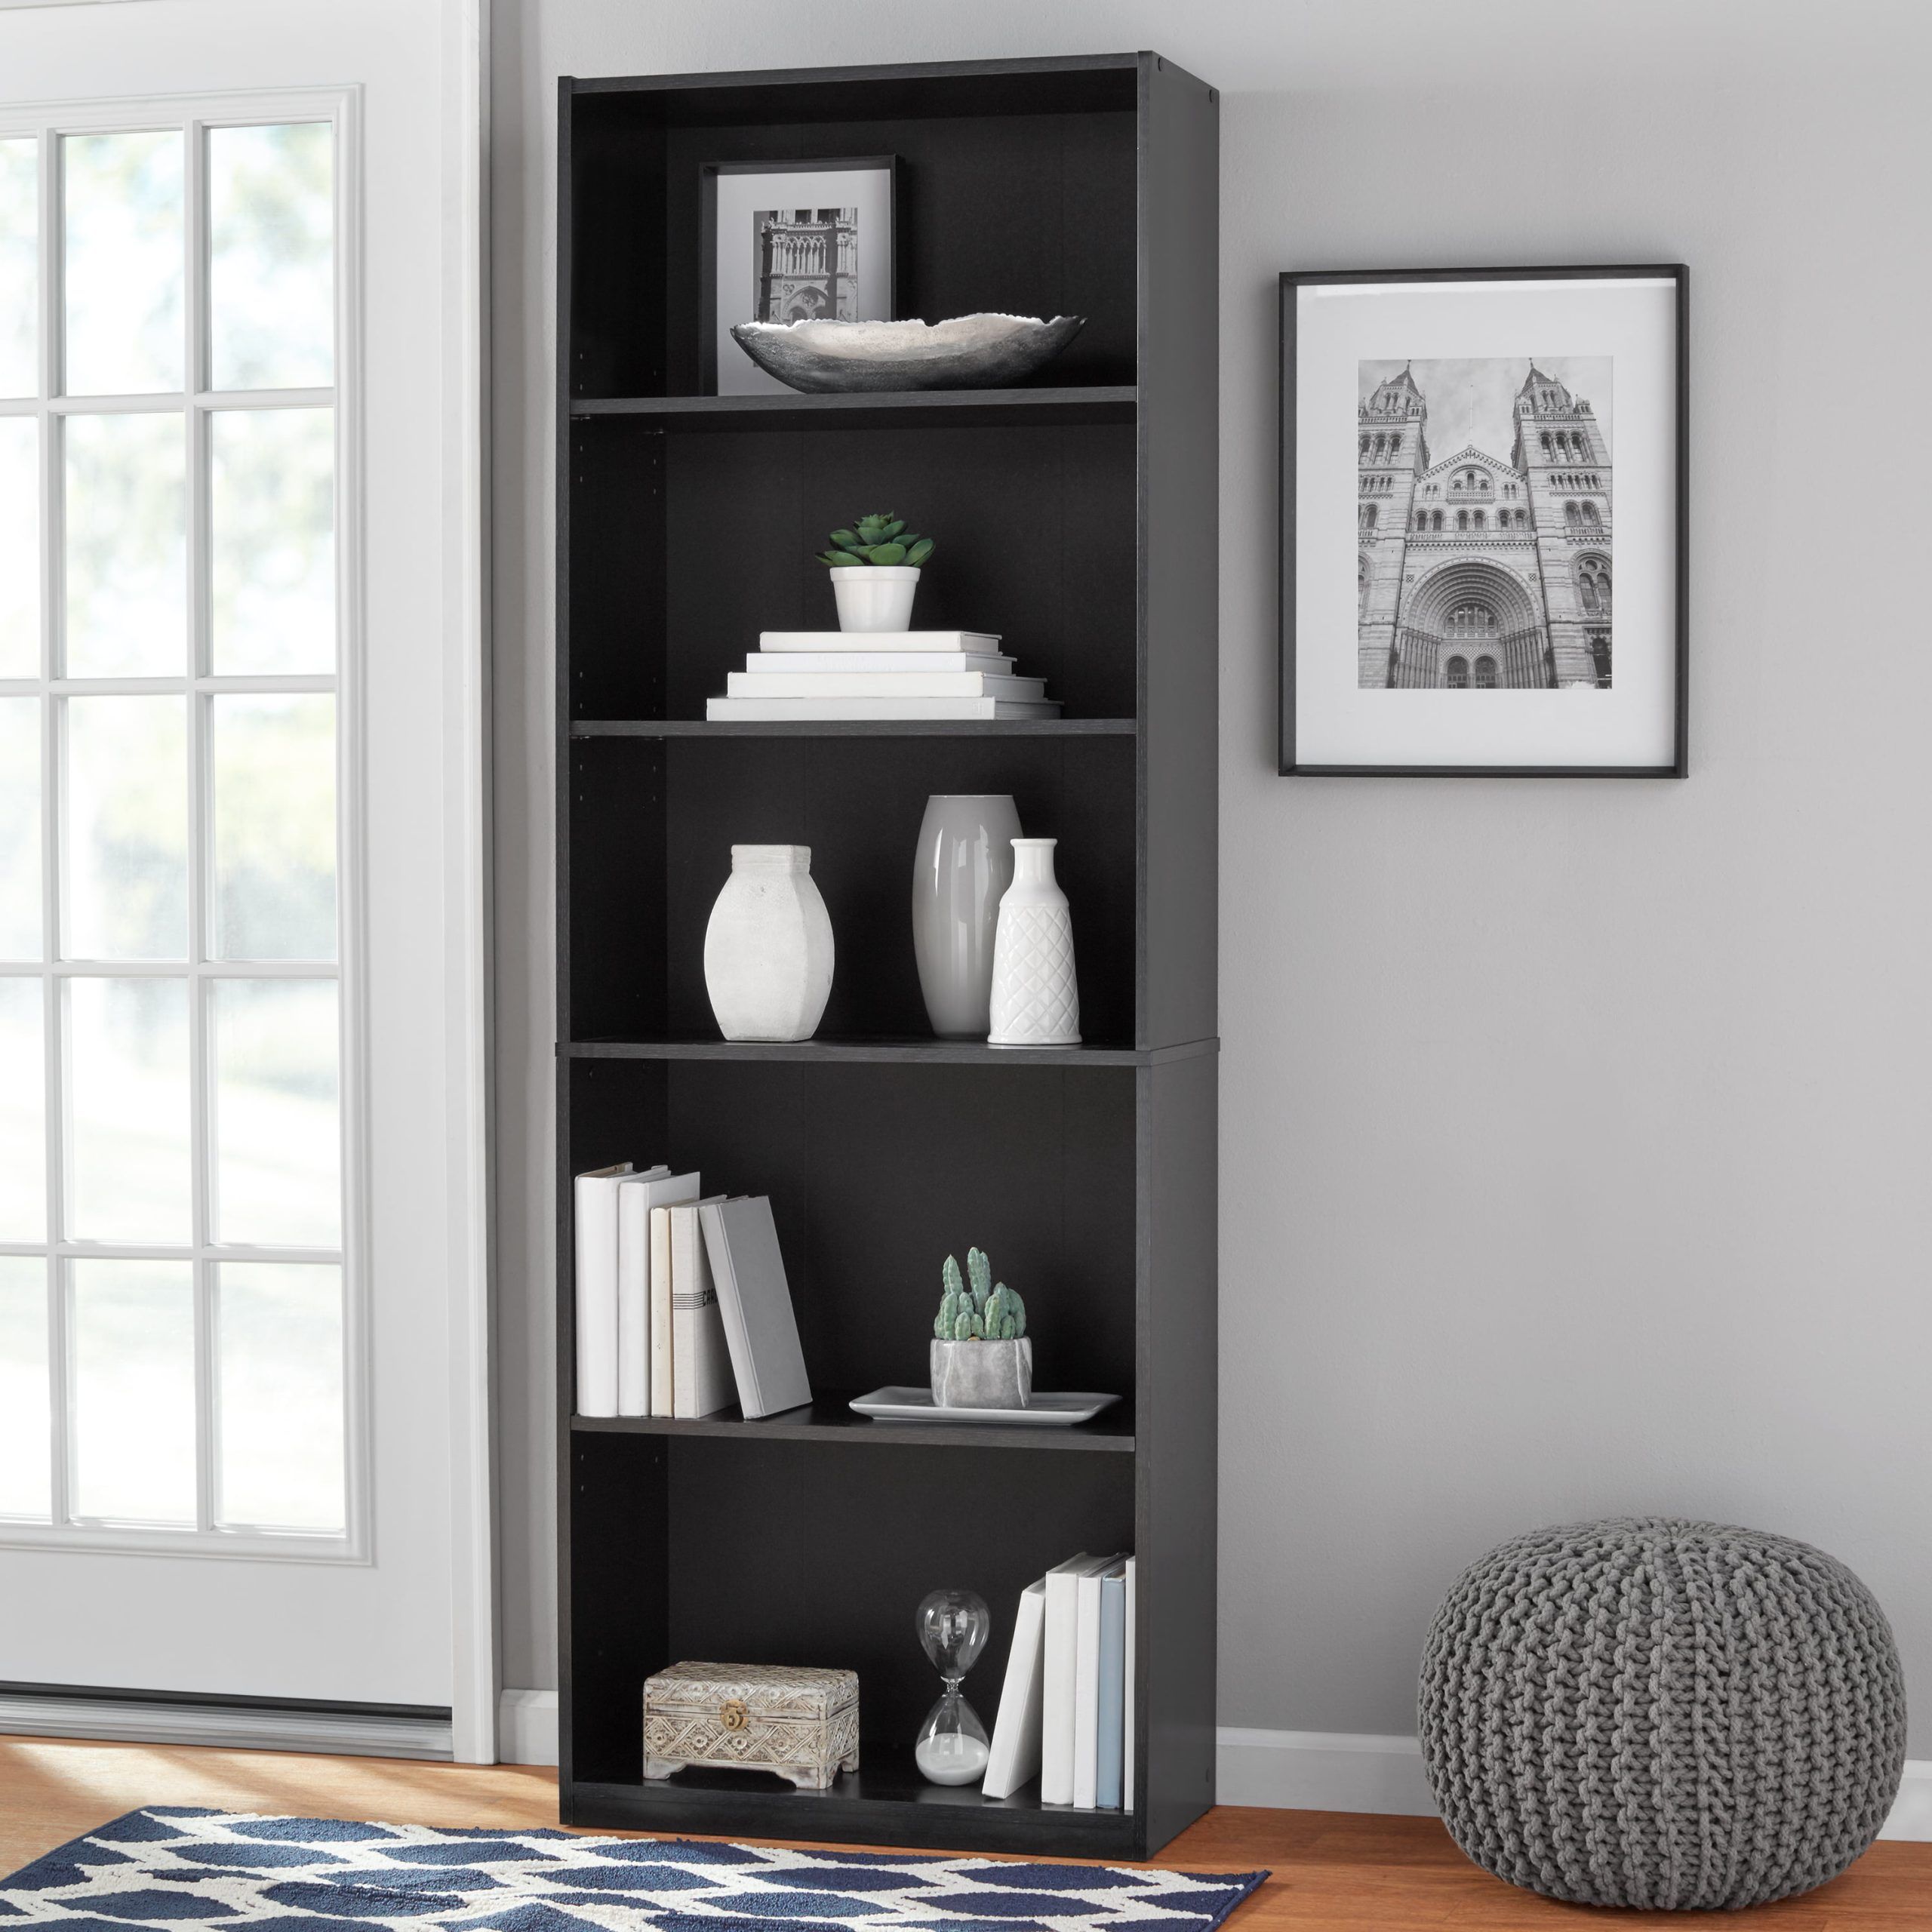 Mainstays 5 Shelf Bookcase With Adjustable Shelves, True Black Oak –  Walmart With Bookcases With Five Shelves (View 7 of 15)